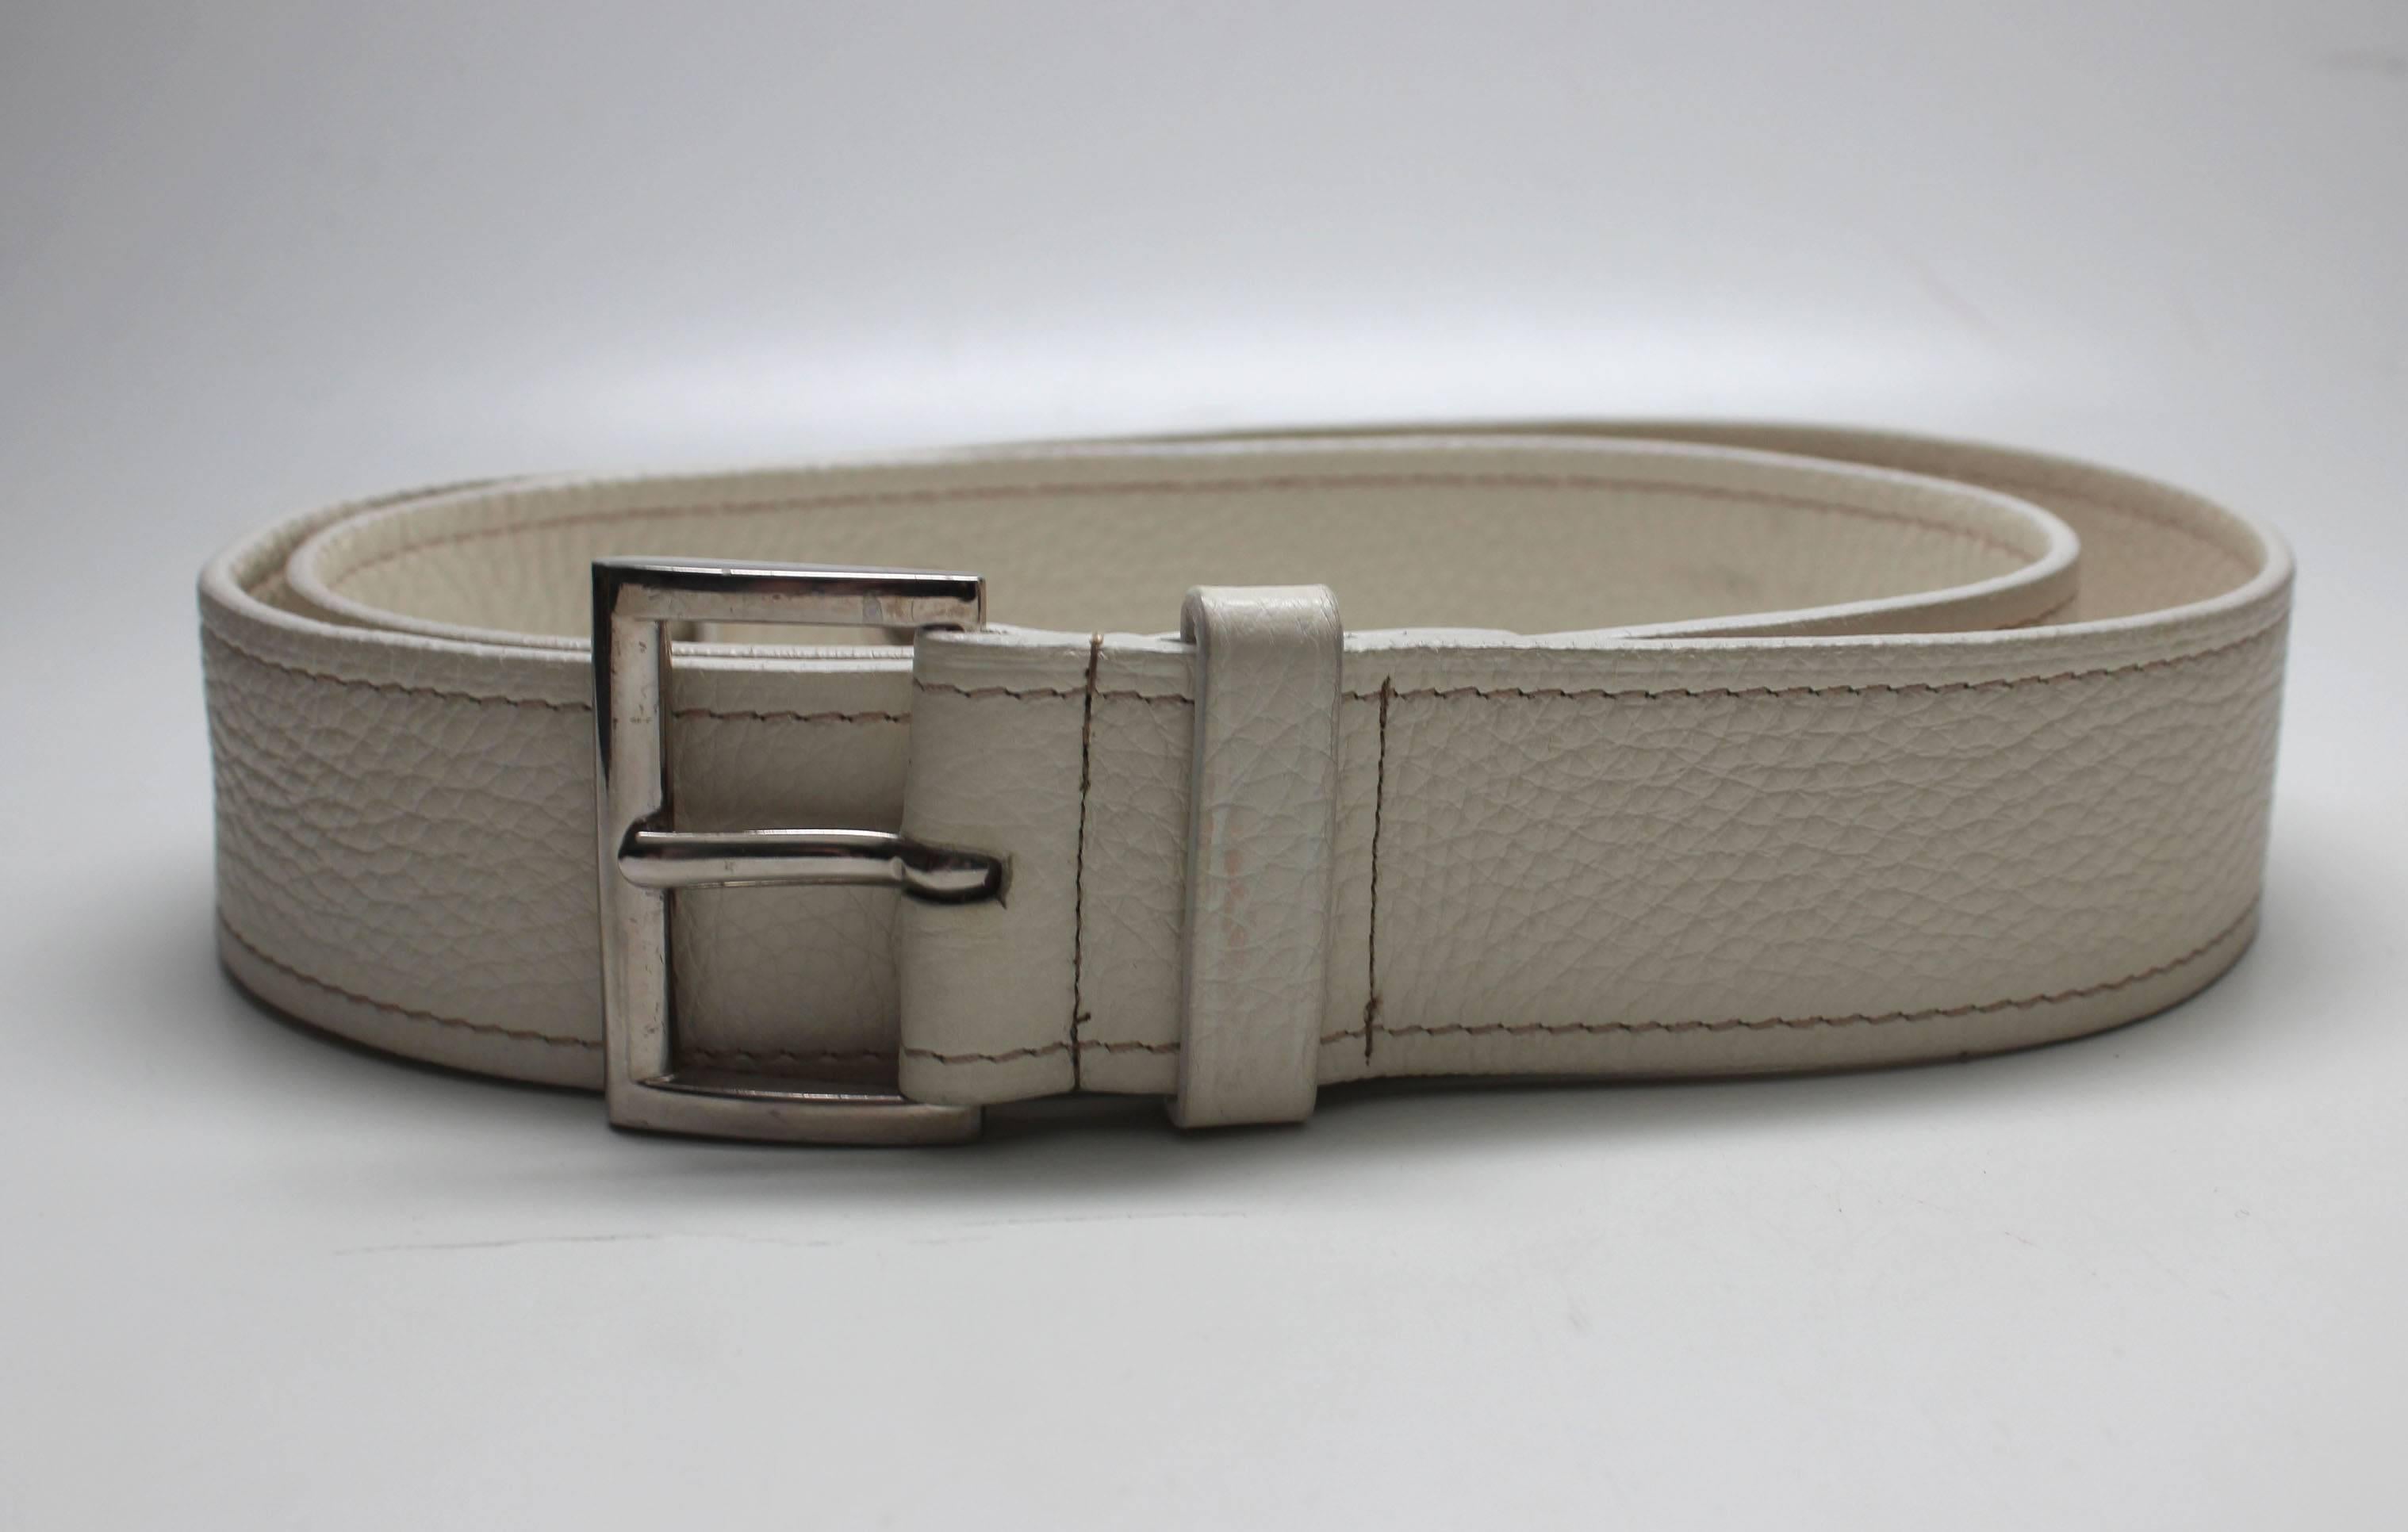 This fine leather belt is in a perfect creme color that is hard to find in mens accessories. The styling is simple but elegant with a silver tone buckle and tan contrasting stitching along its edges. There is also a nice stitched detail at its end. 